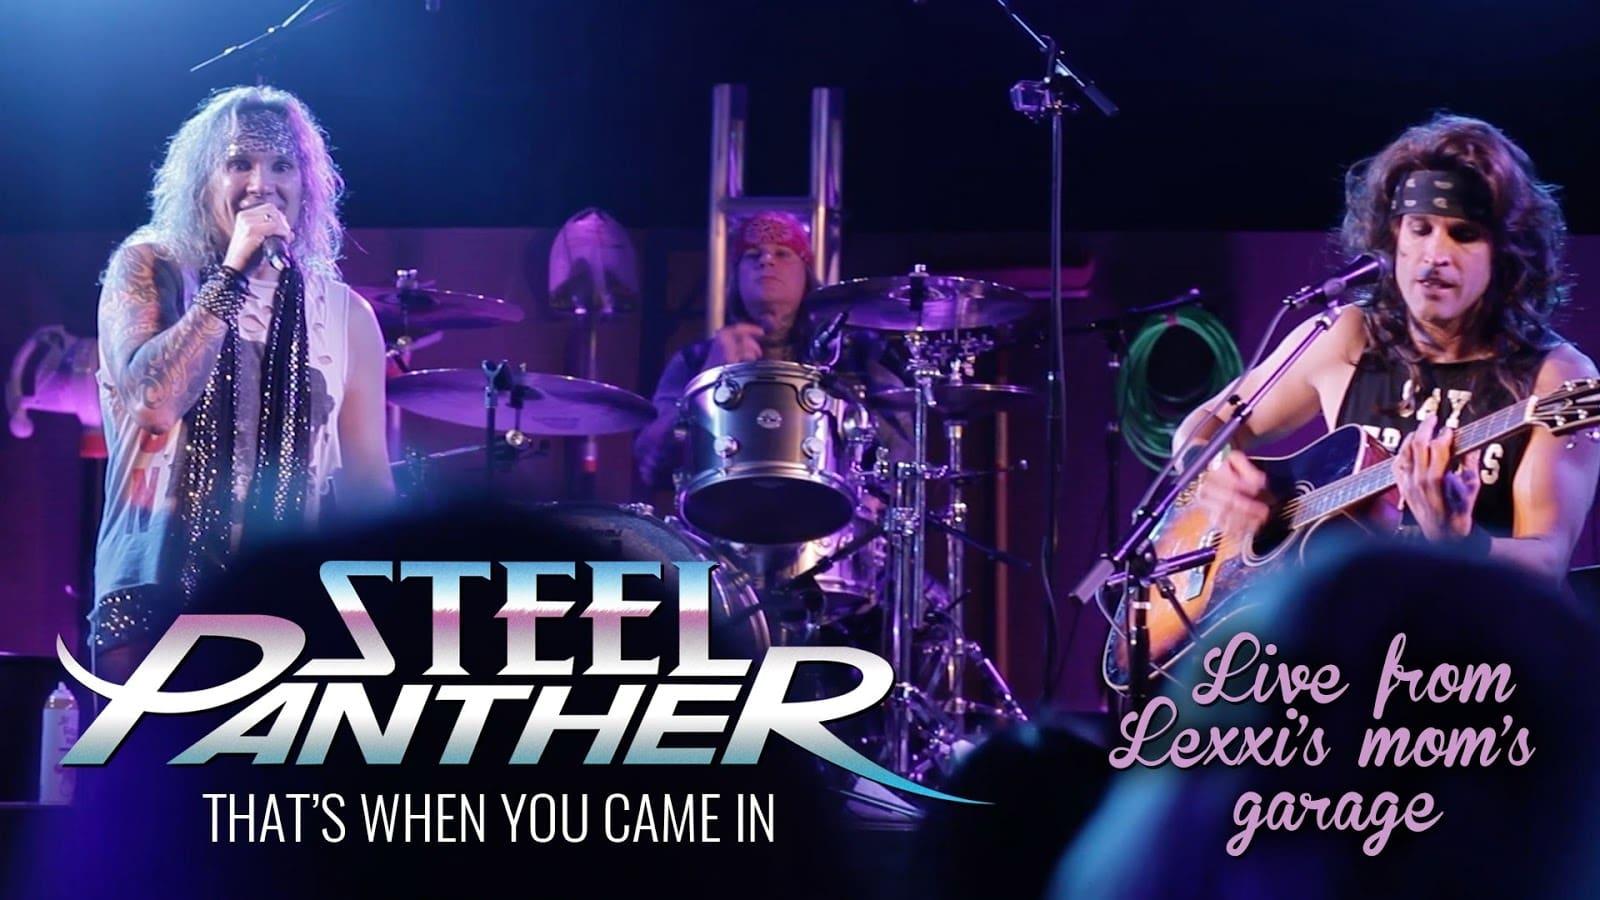 Steel Panther Live from Lexxi's Mom's Garage backdrop